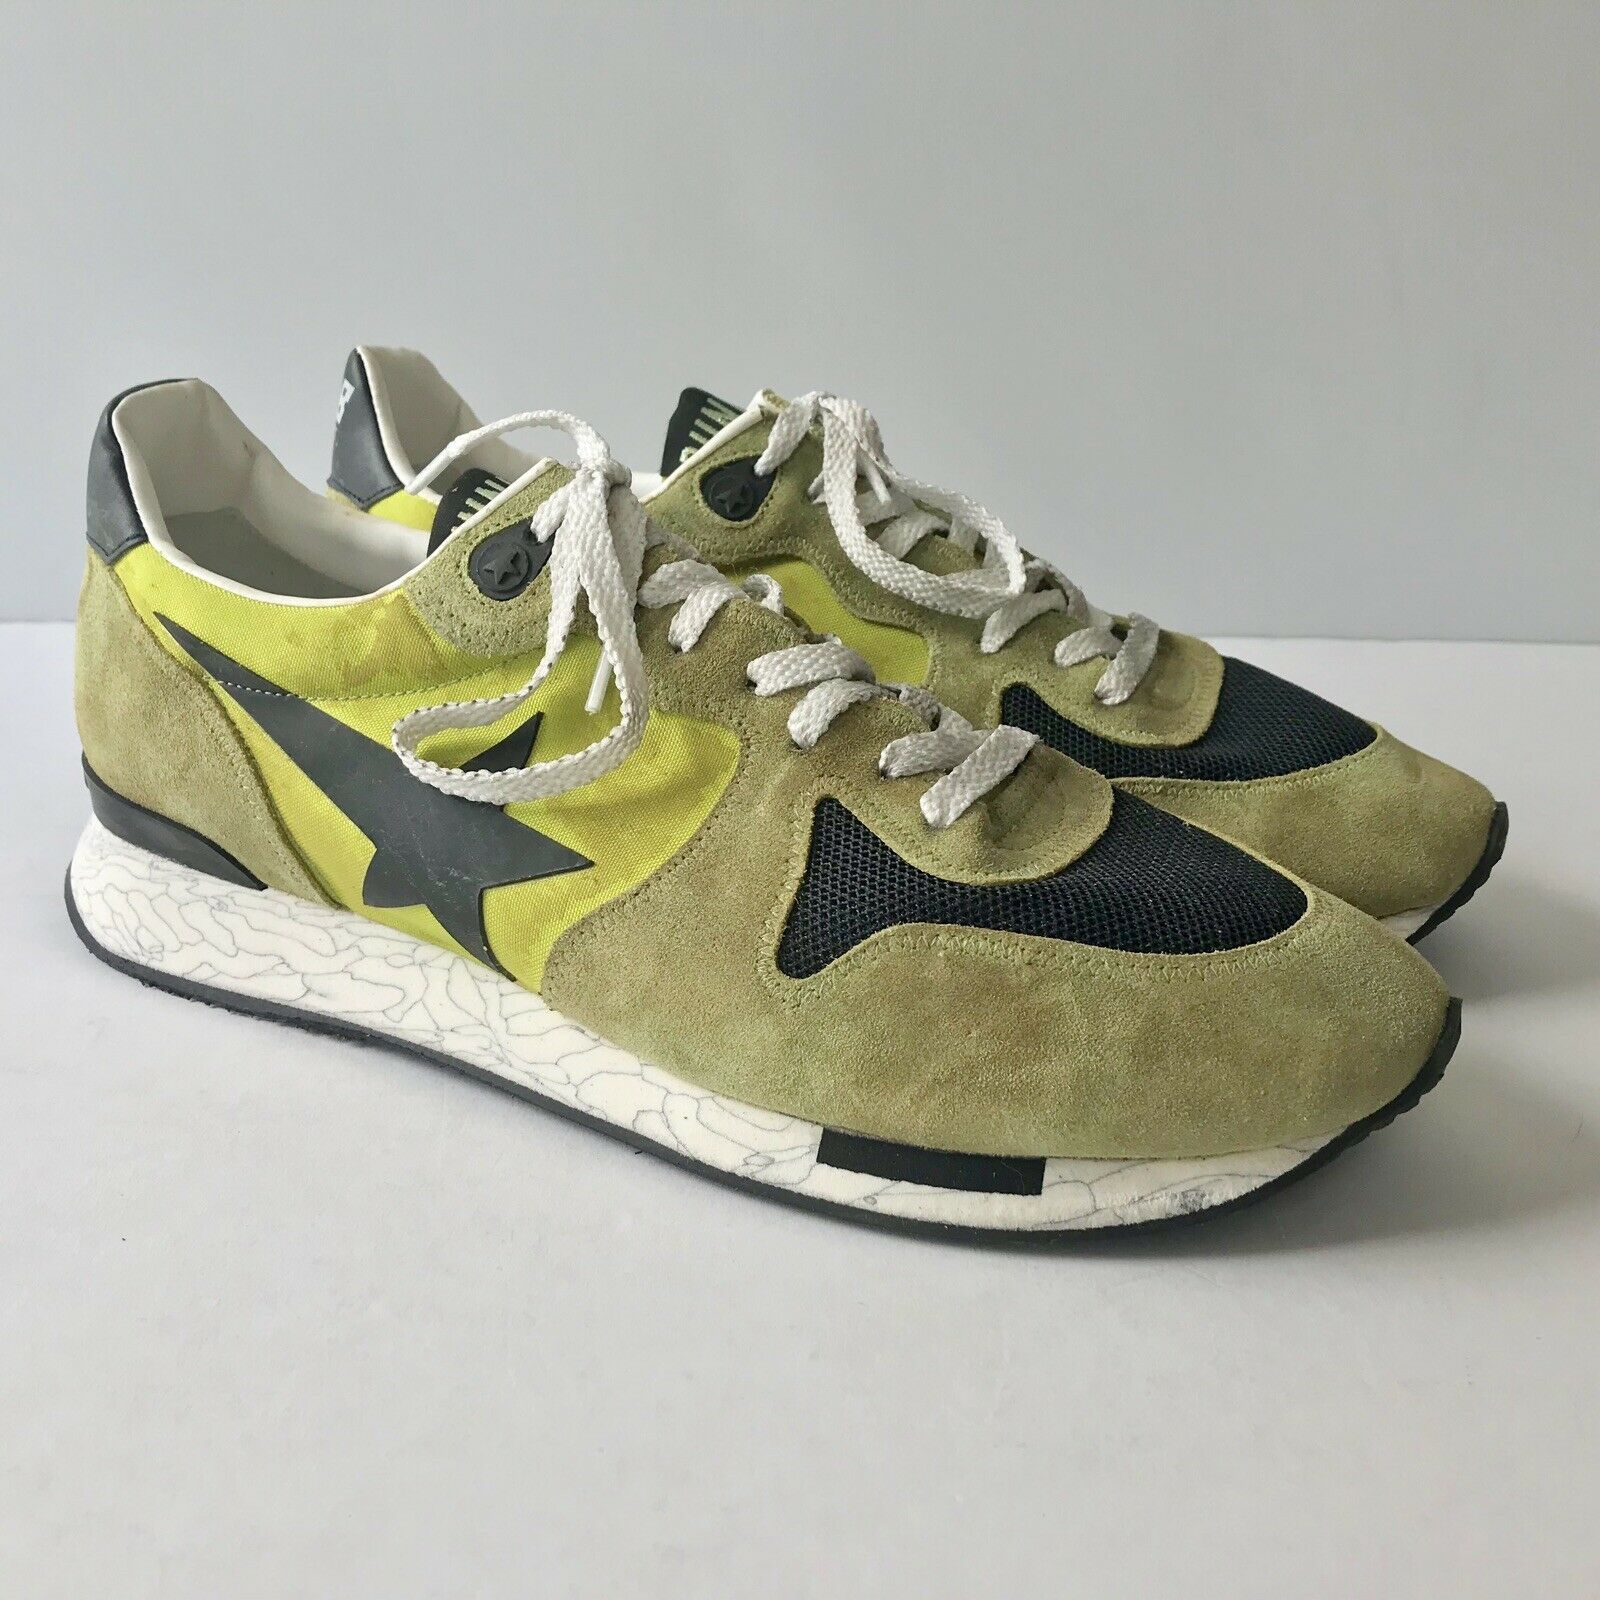 P-26952 Golden Goose GGOB/VCE Lime Running Sneakers Shoe Size US 6 ...